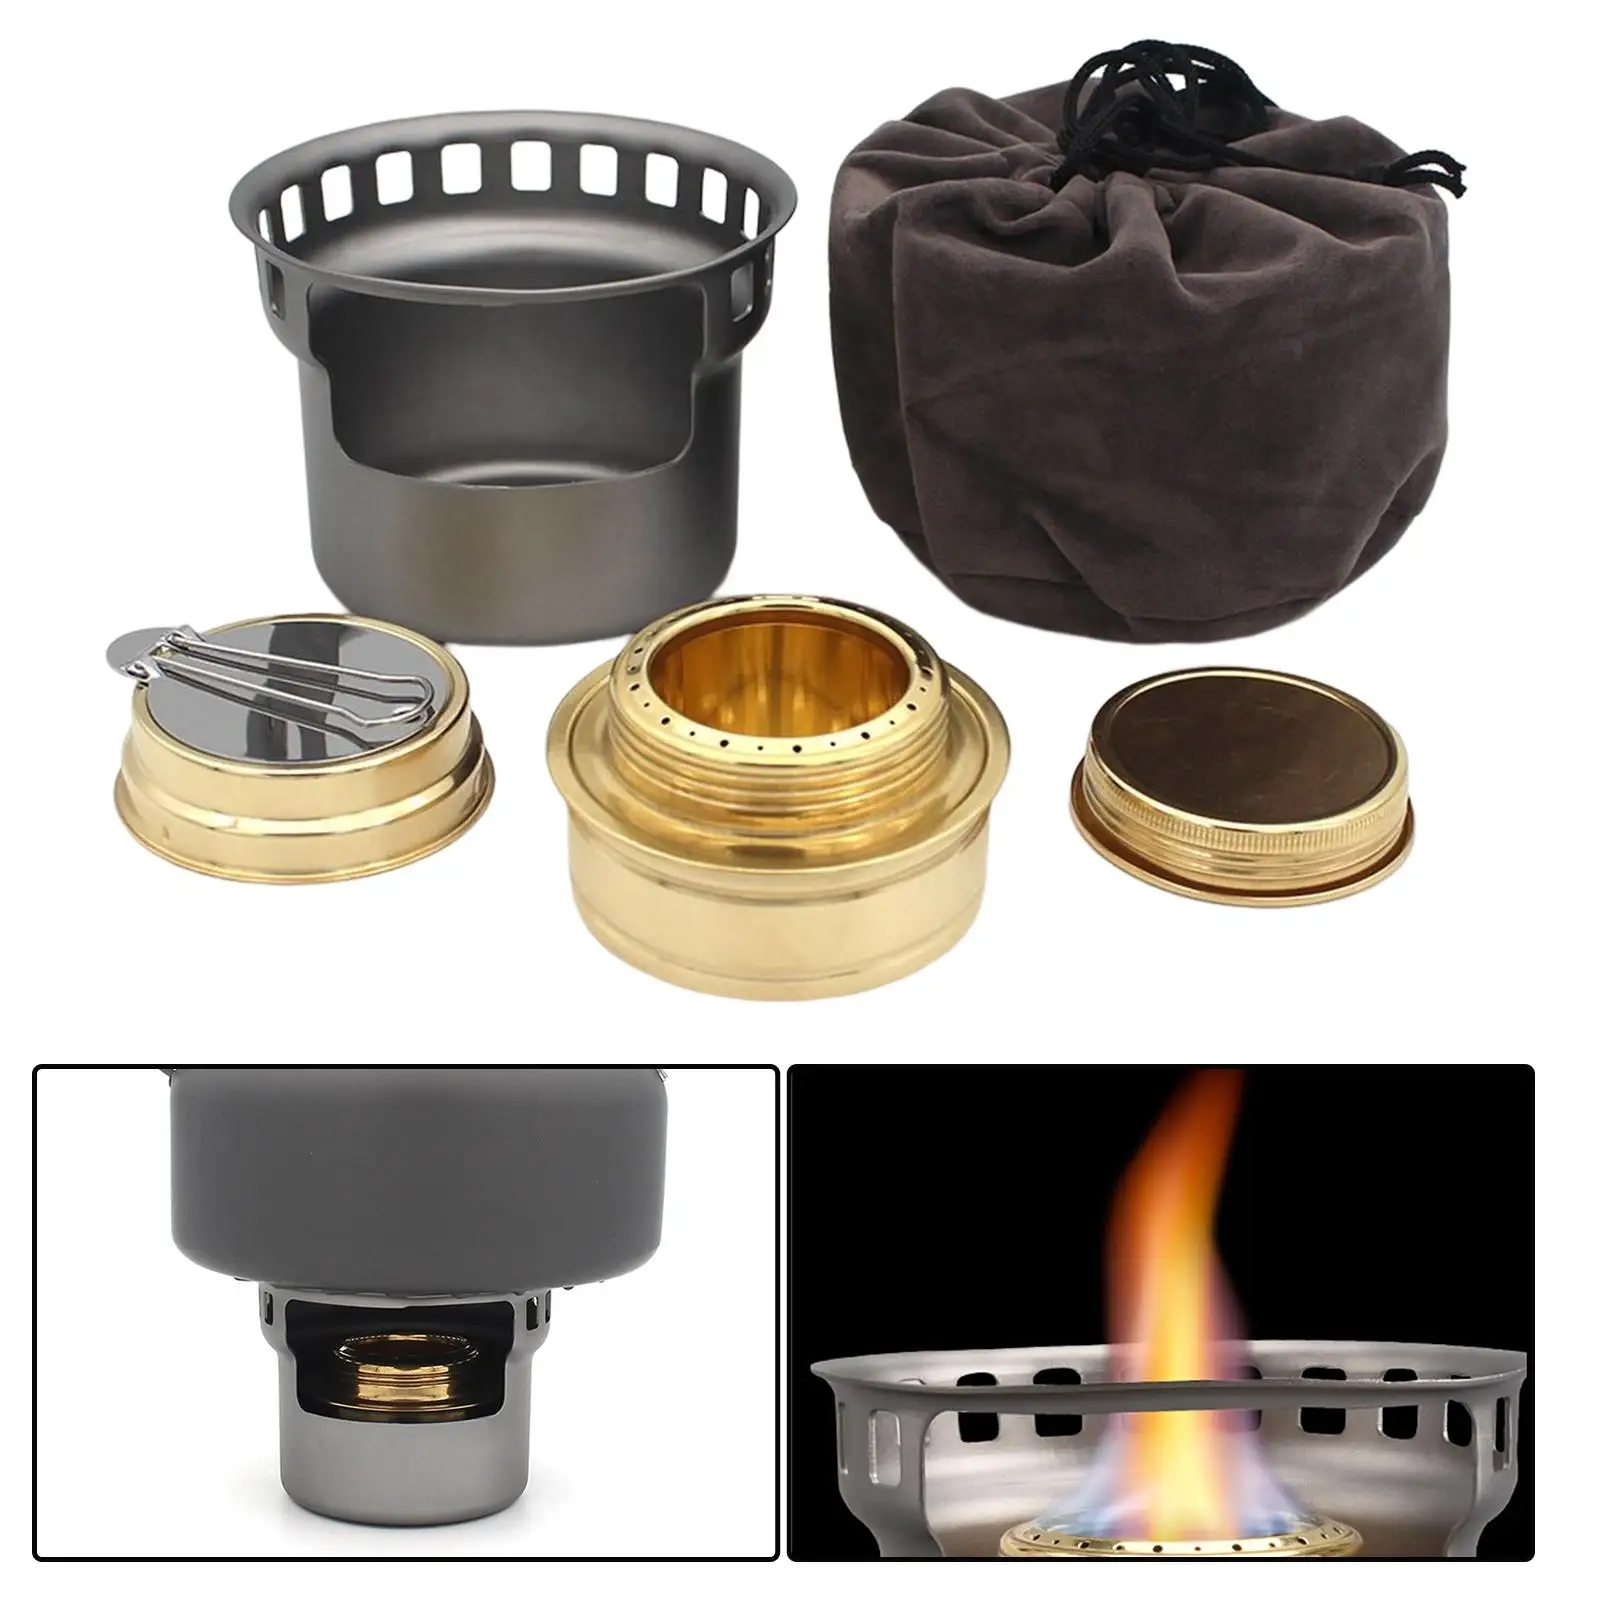 Spirit Stove Burner with Storage Bag Accessories Multifunctional for Fishing